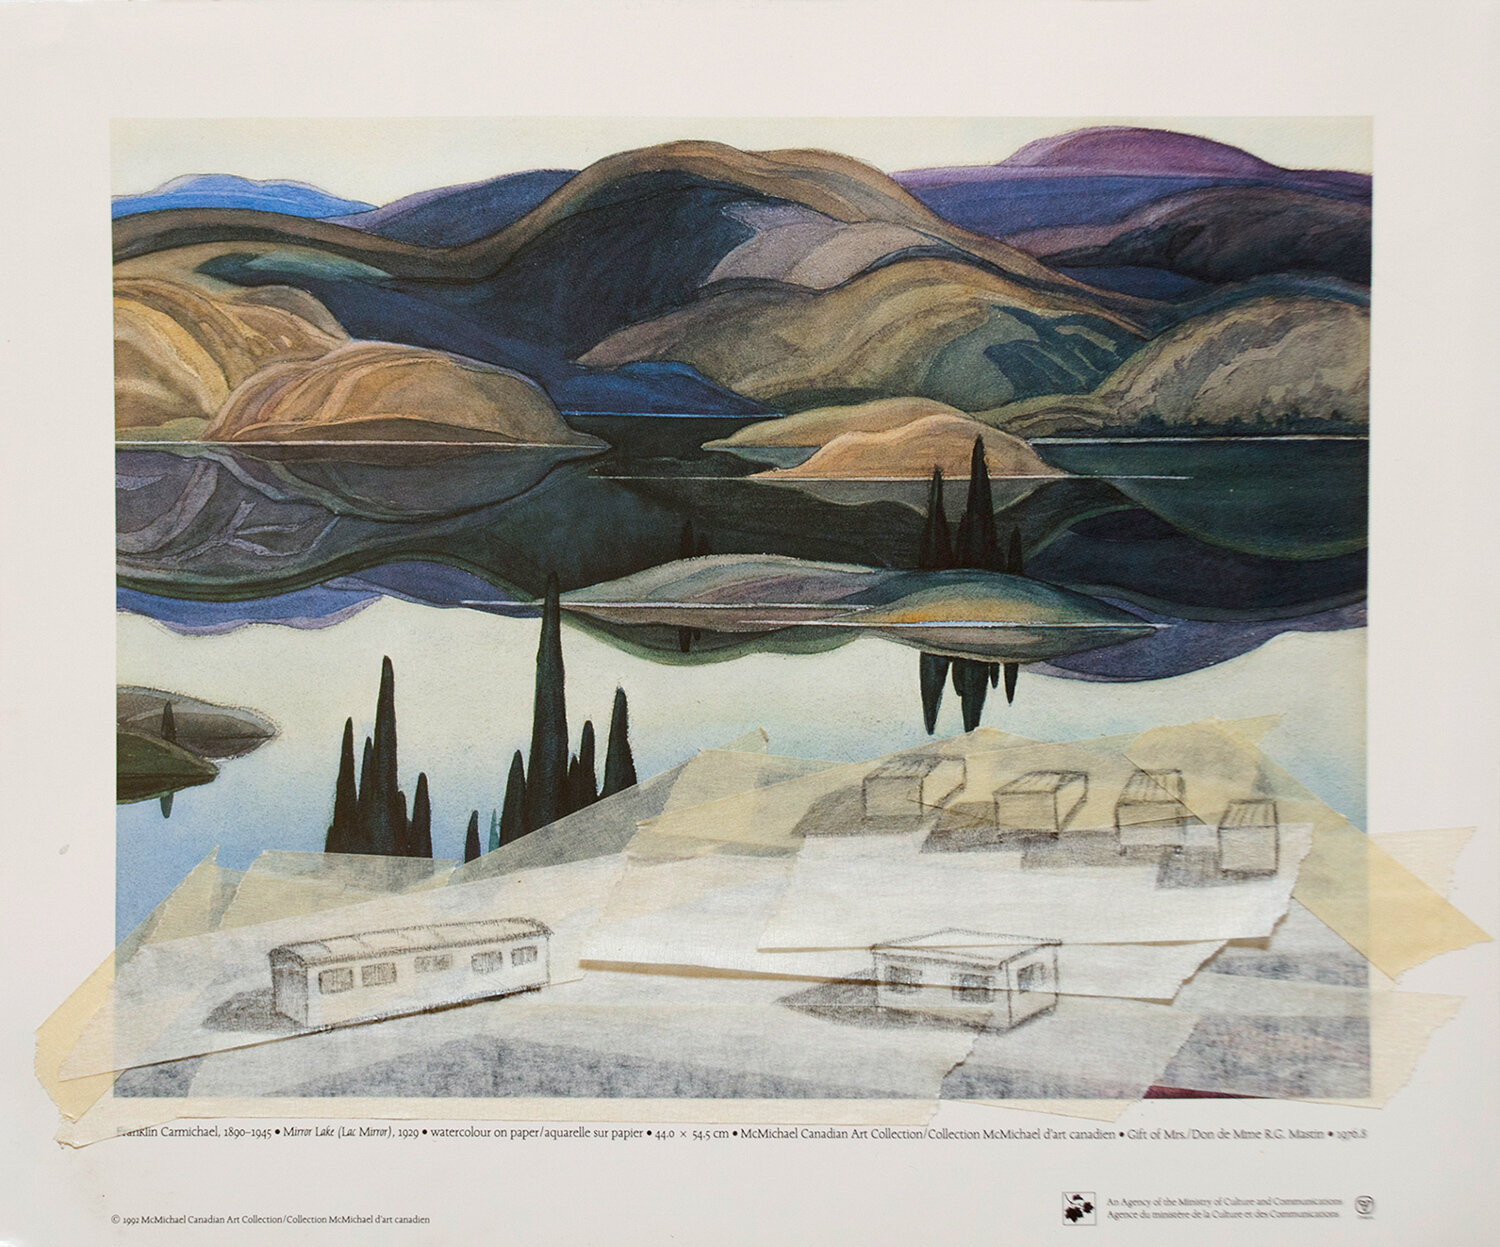 The redemption of Franklin Carmichael’s Miror lake (1929), Pencil and Maskingtape on a reproduction, 2013